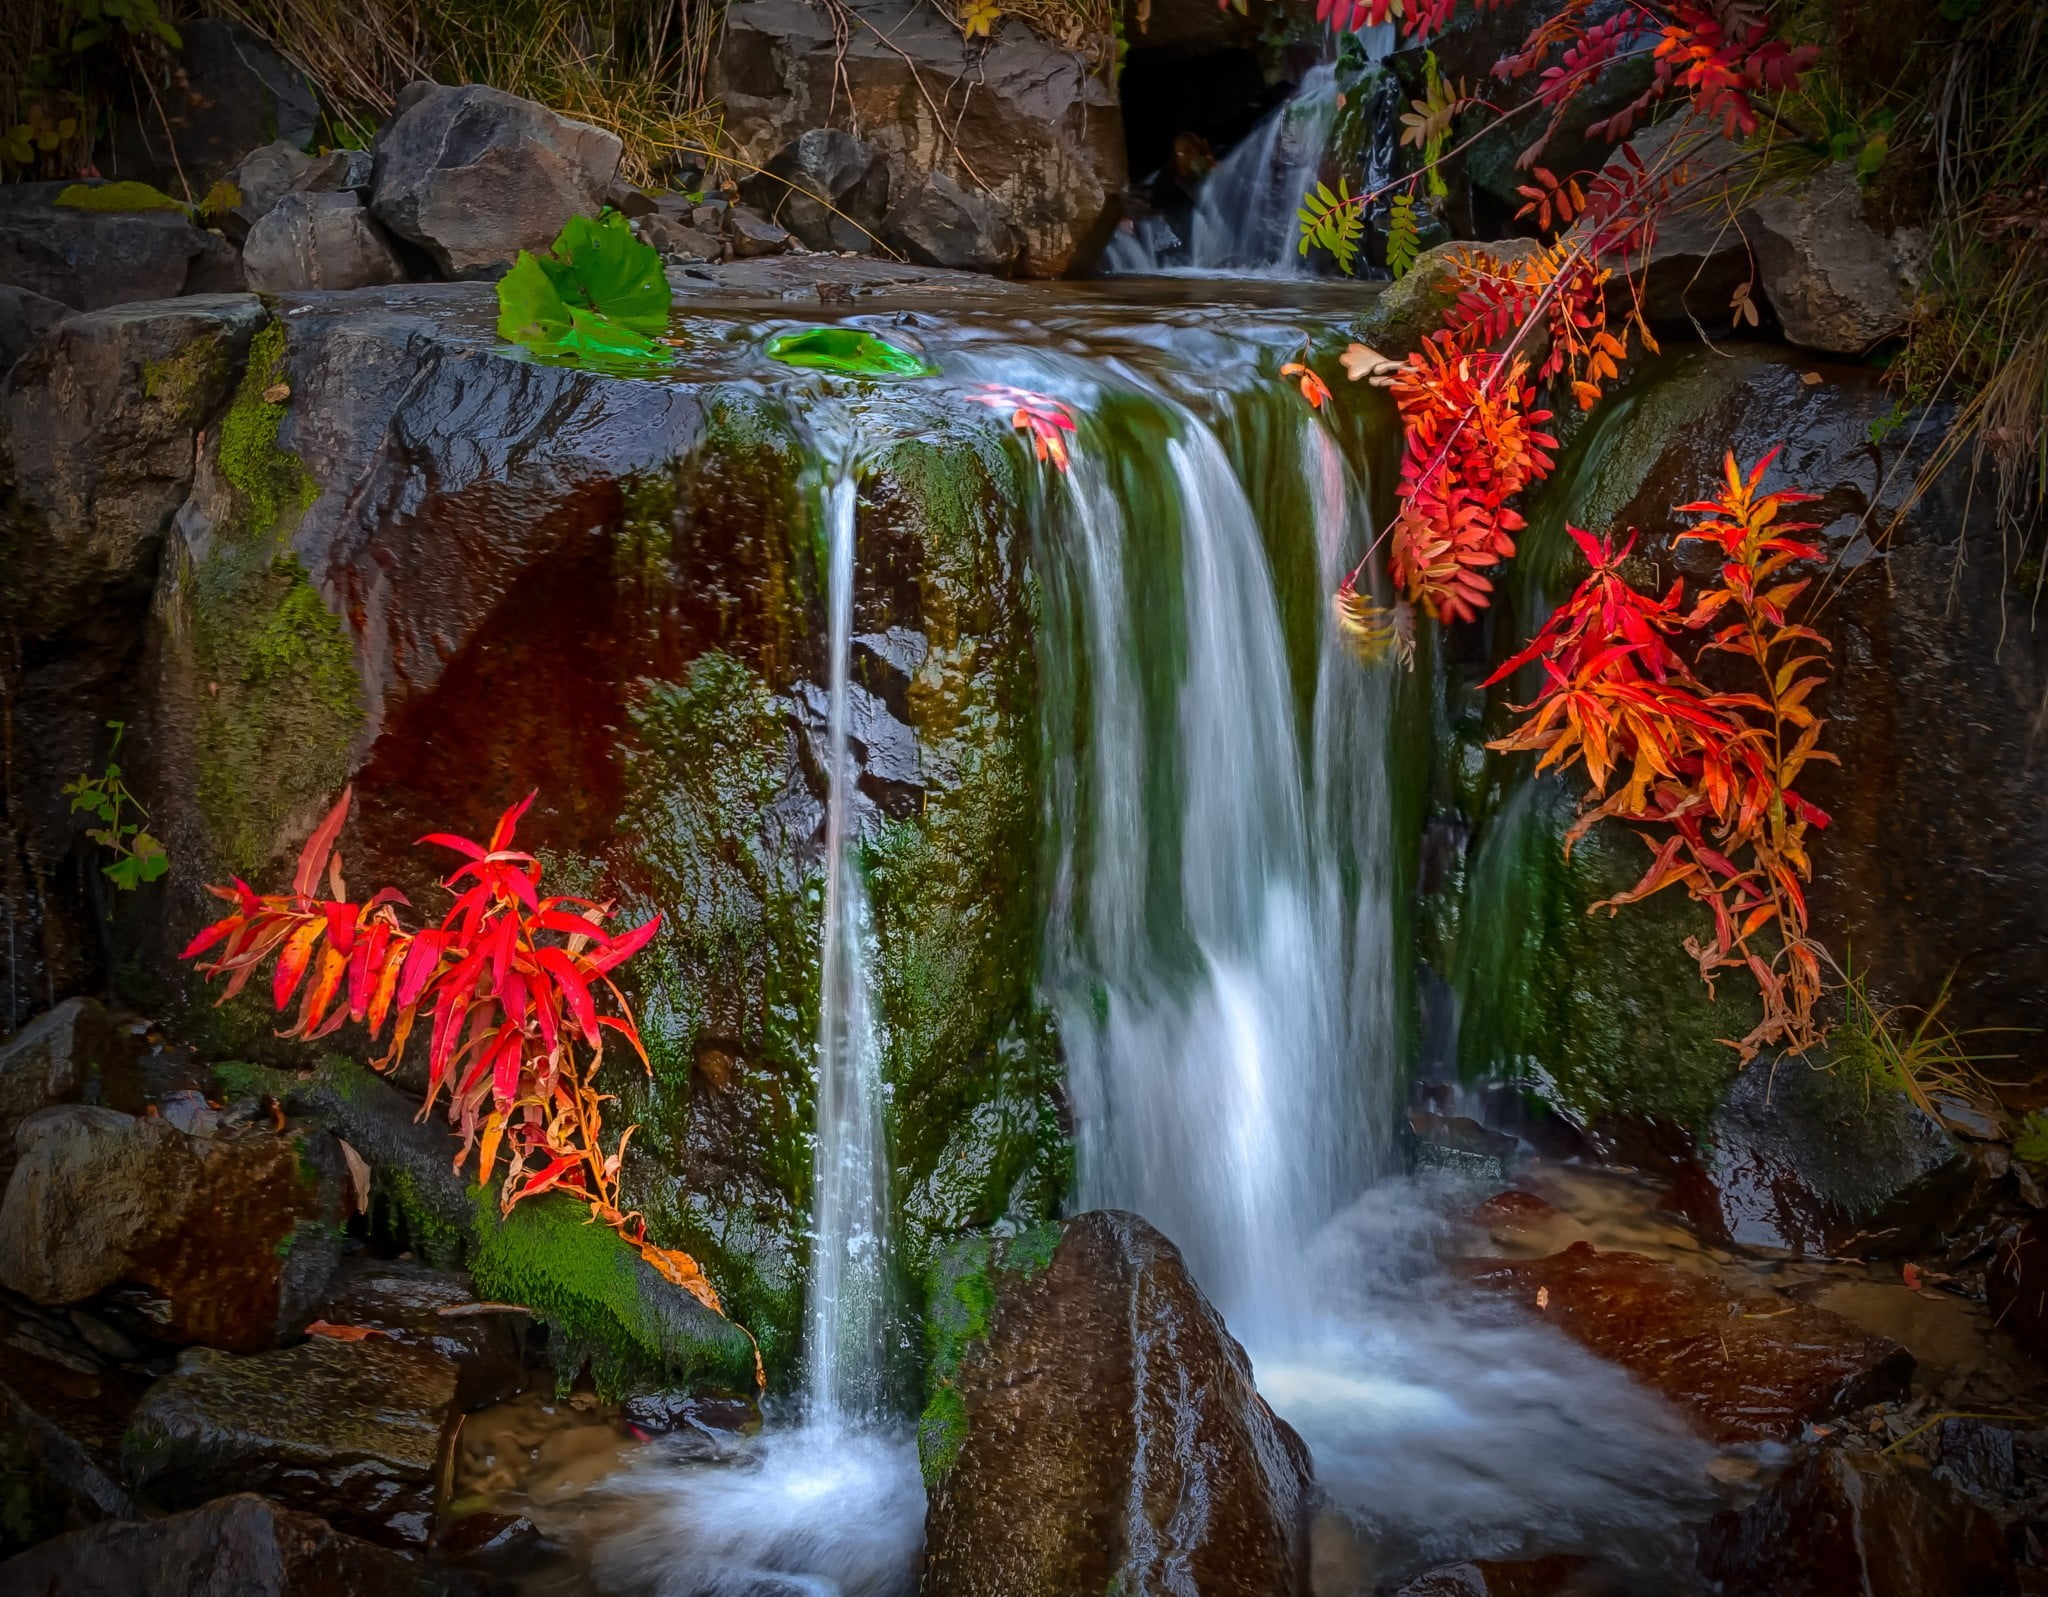 clear waterfalls, nature, colorful, leaves, moss, red, landscape